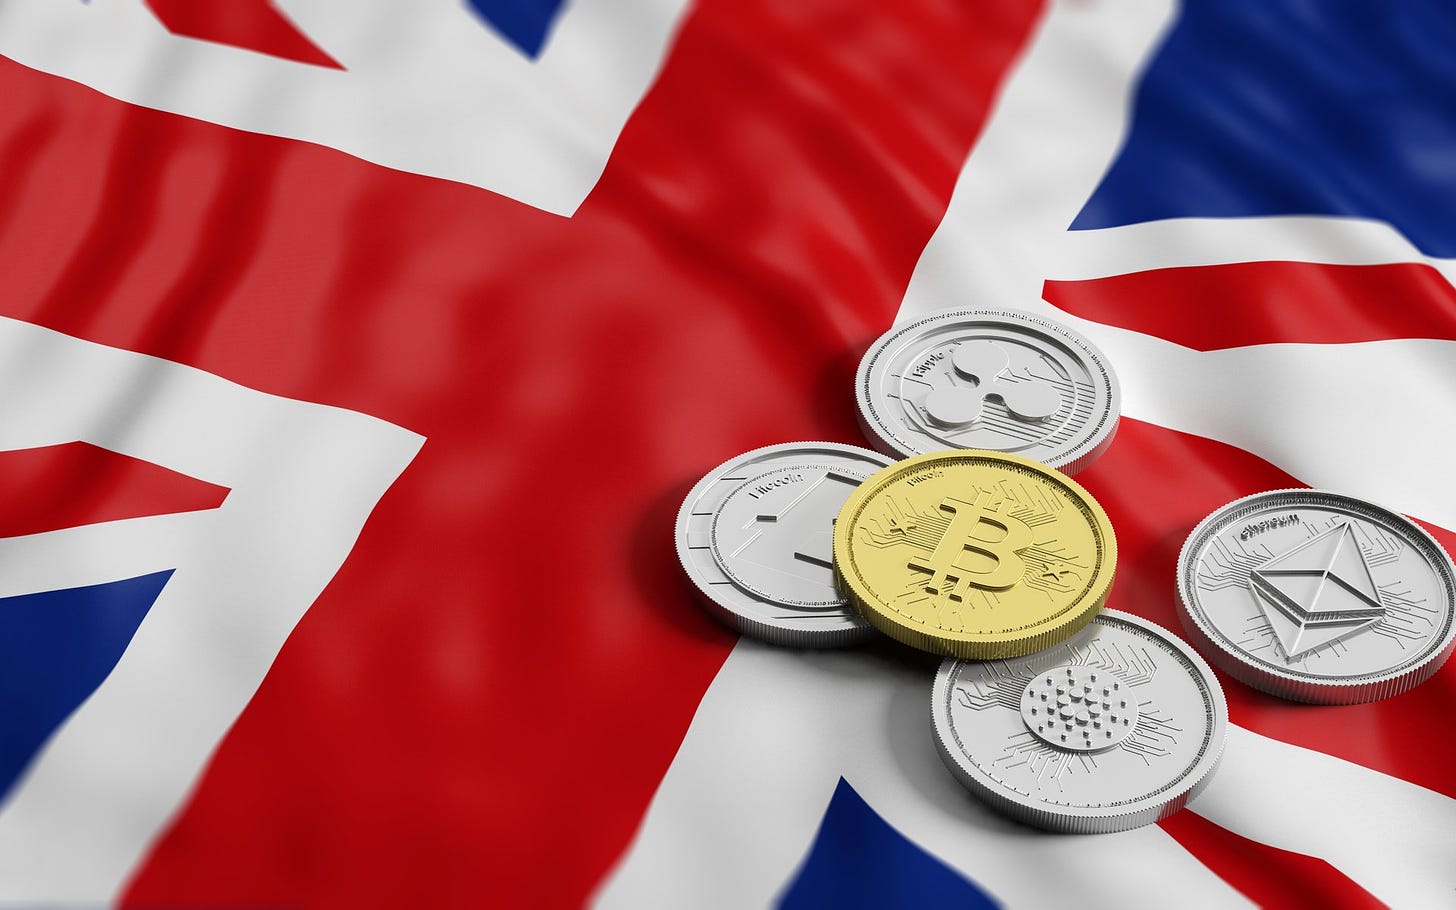 UK Poised to Lead Cryto and Blockchain Economies, New Report Claims |  Bitcoinist.com